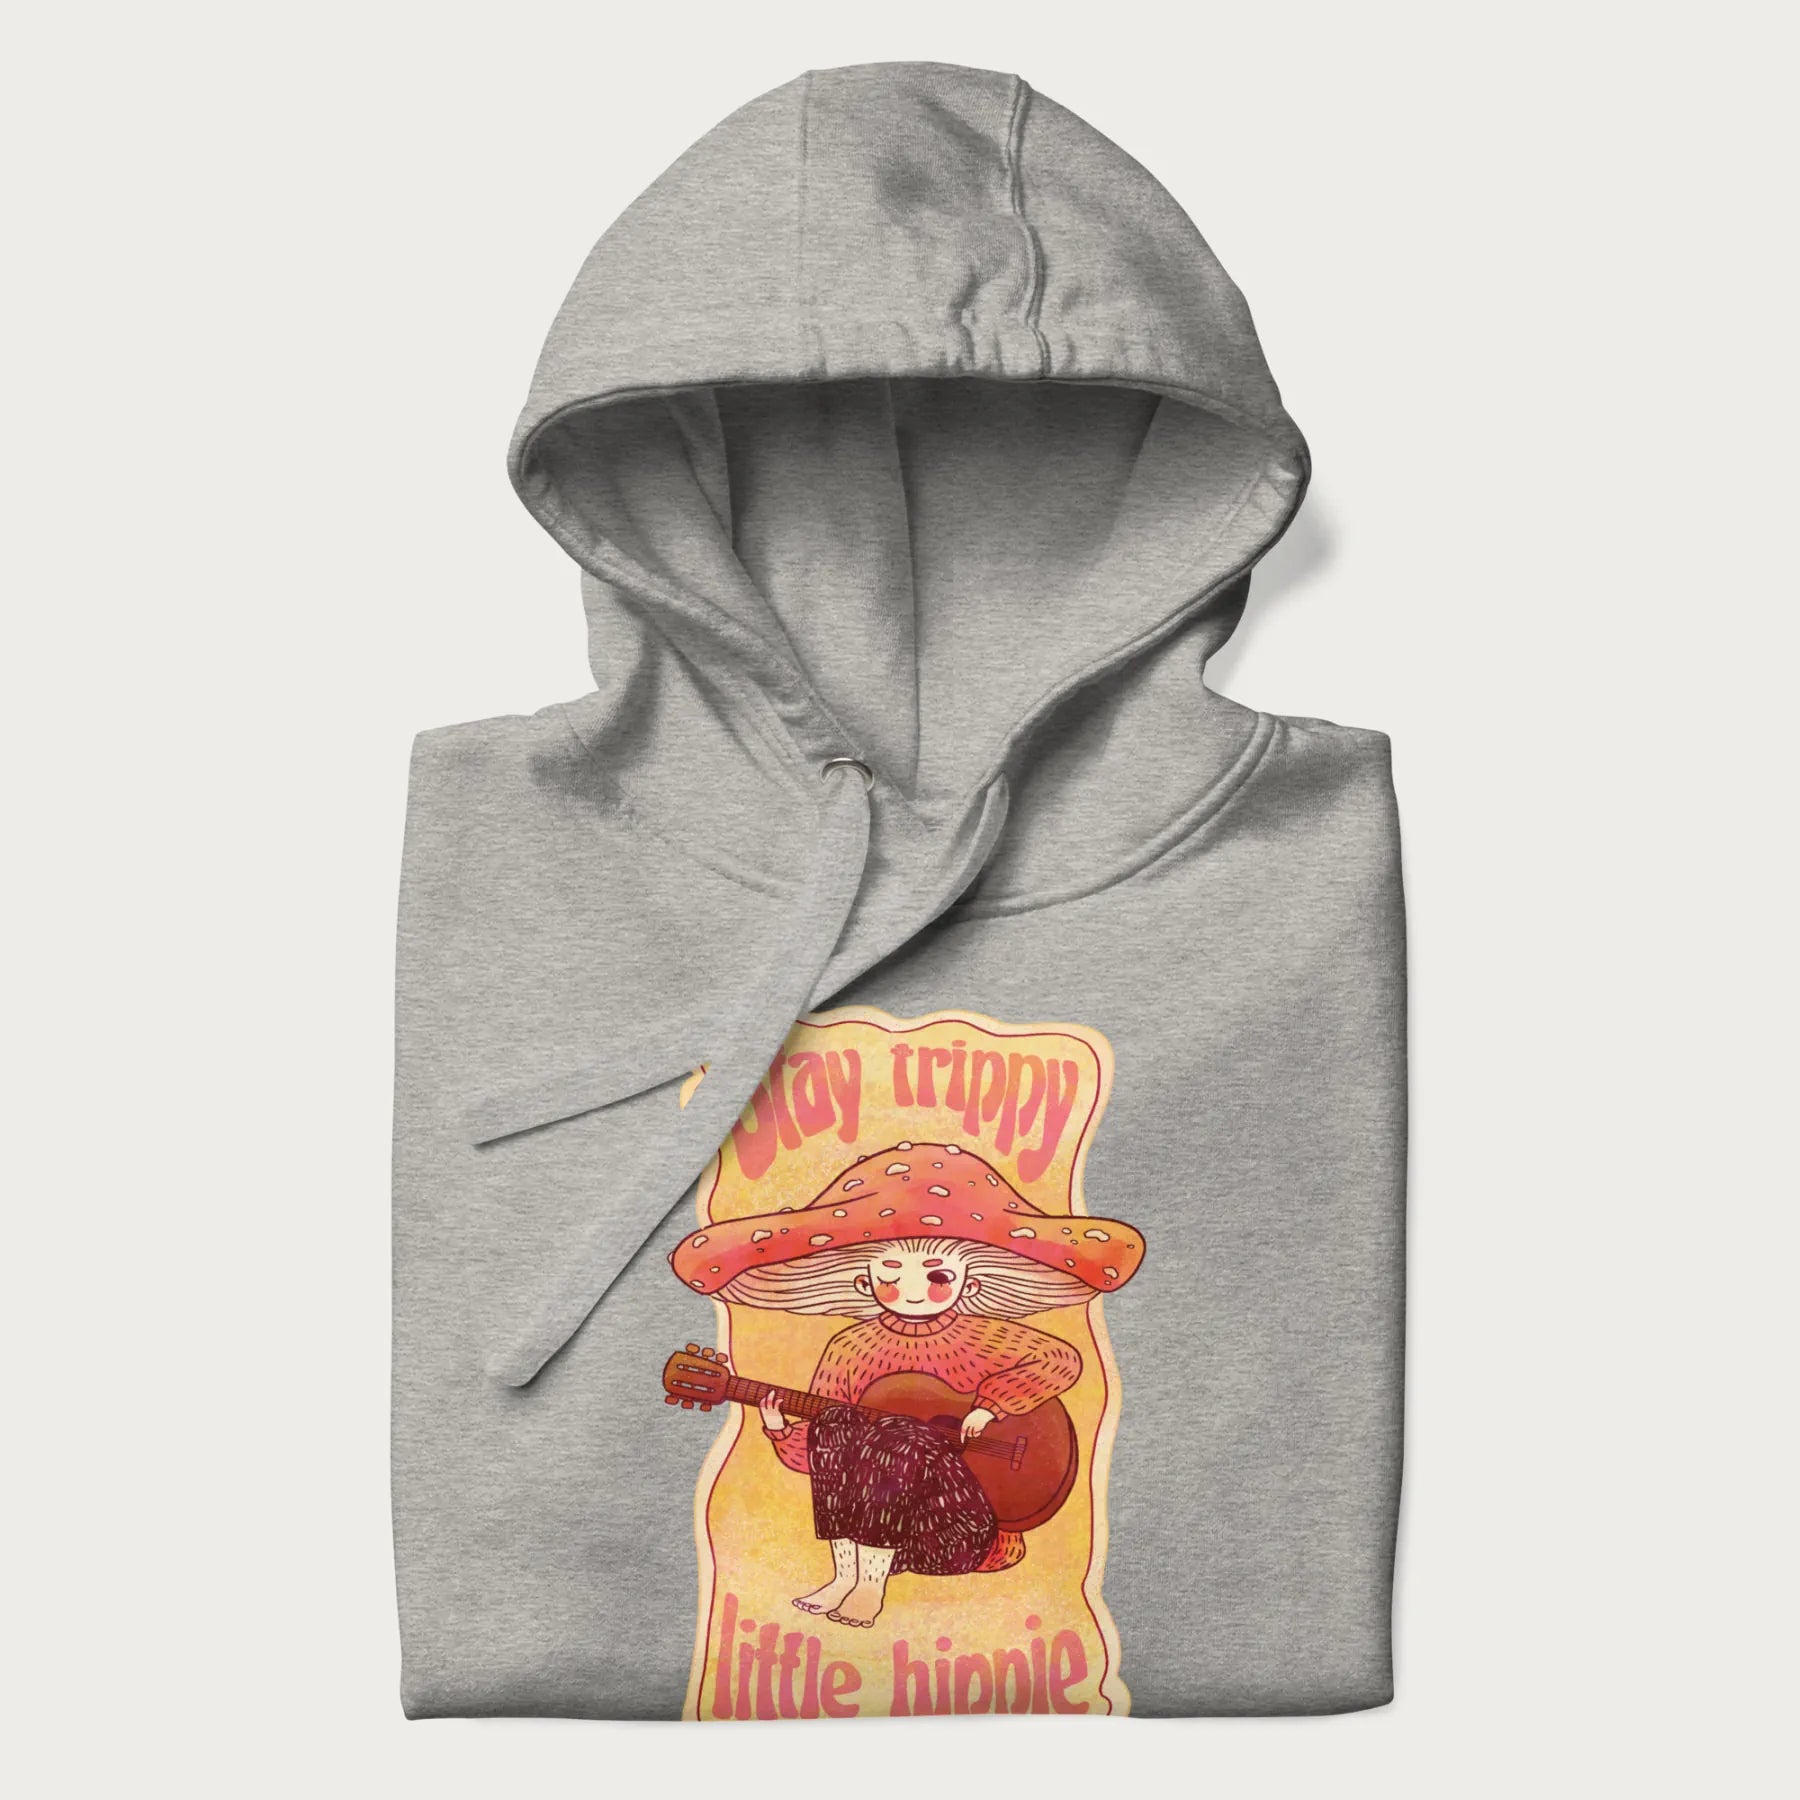 Folded light grey hoodie with a graphic of a character with a mushroom cap playing a guitar and the text 'Stay Trippy Little Hippie.'